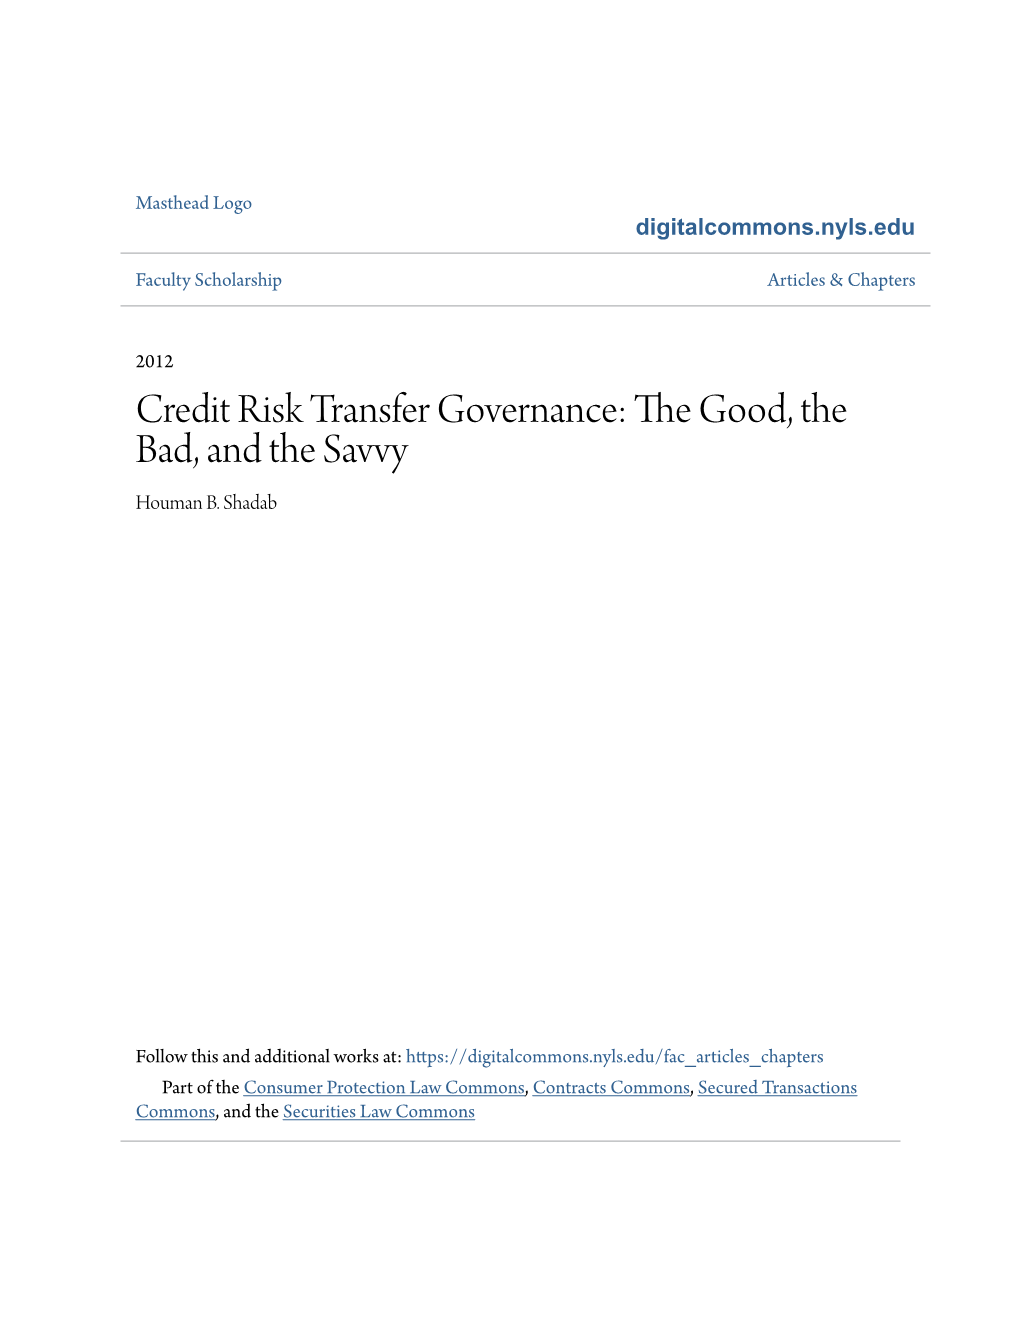 Credit Risk Transfer Governance: the Good, the Bad, and the Savvy Houman B